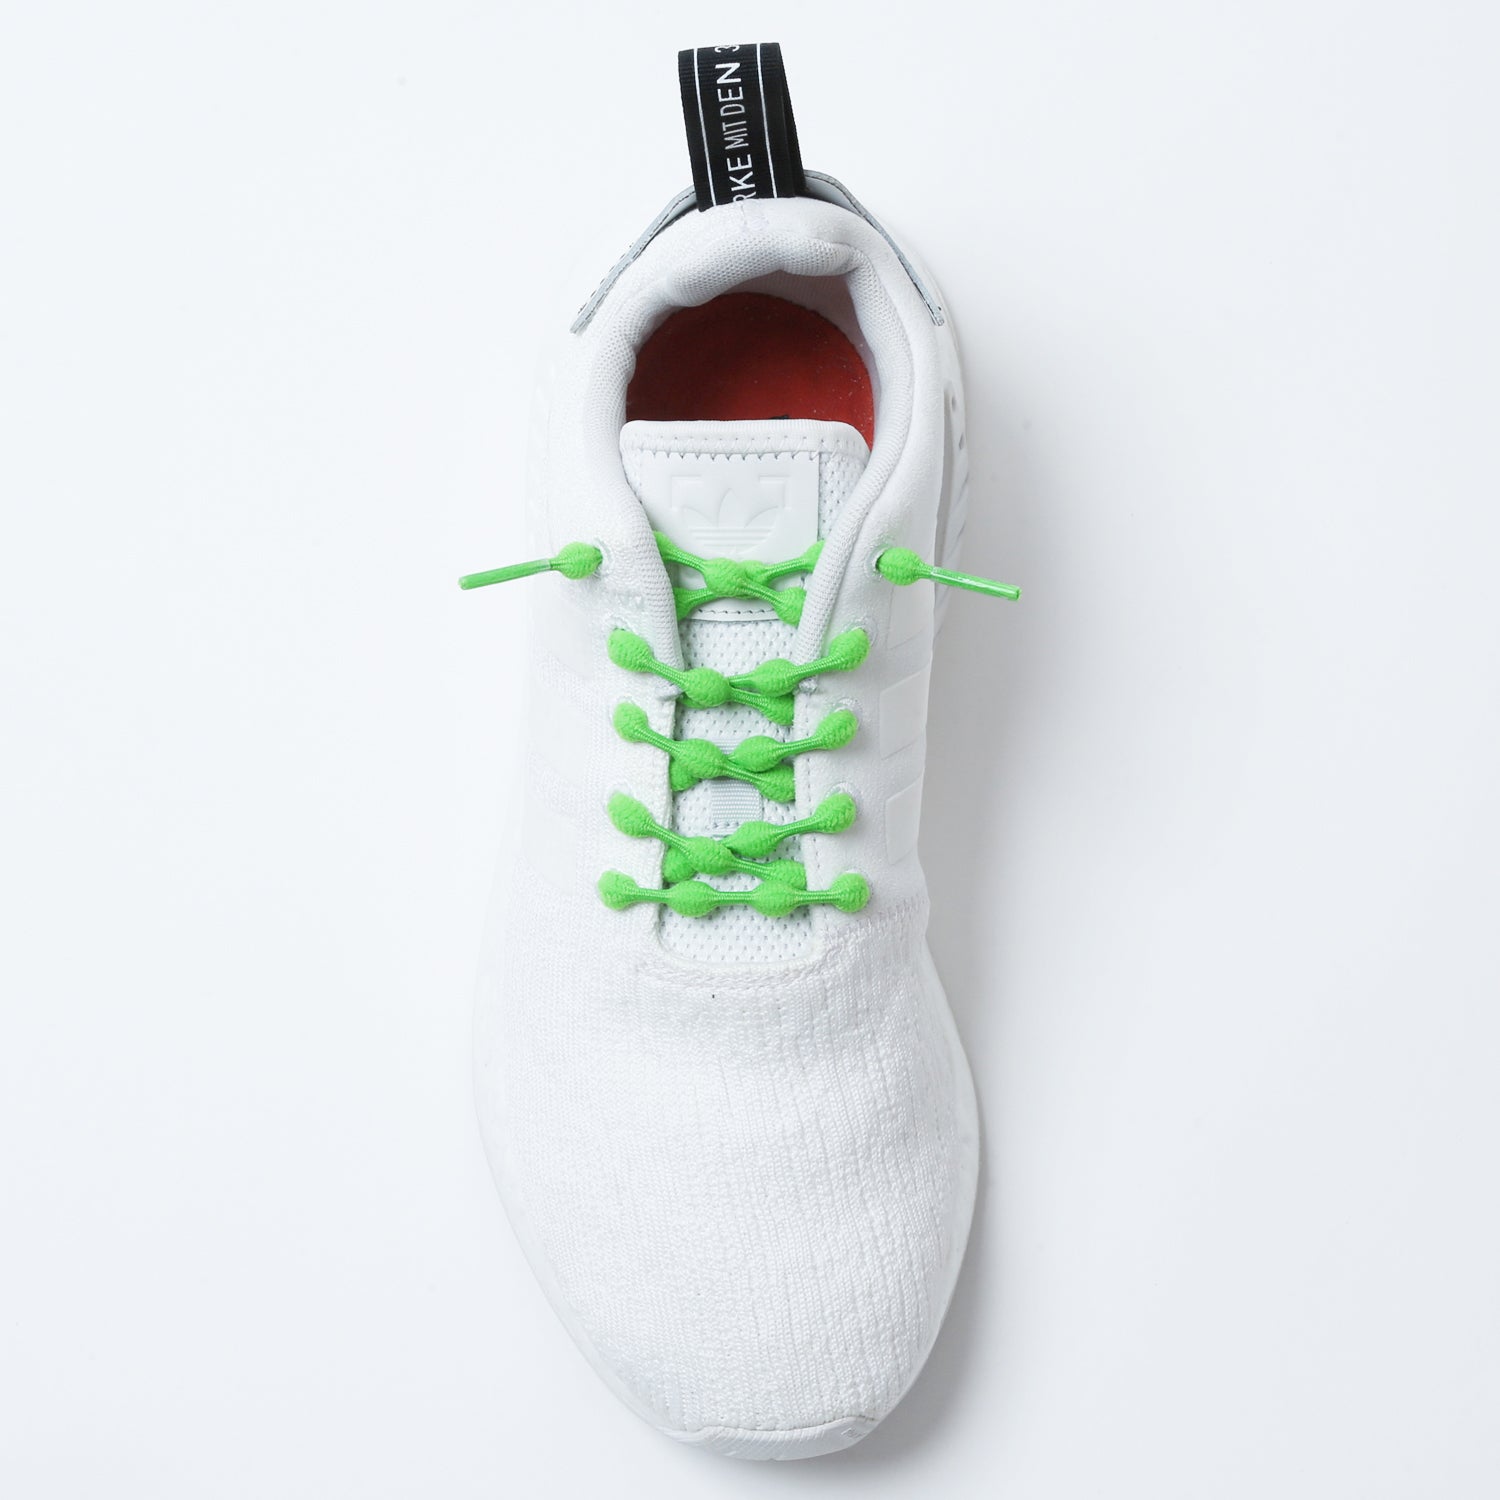 No tie shoelace | for runners | The - Caterpy Run